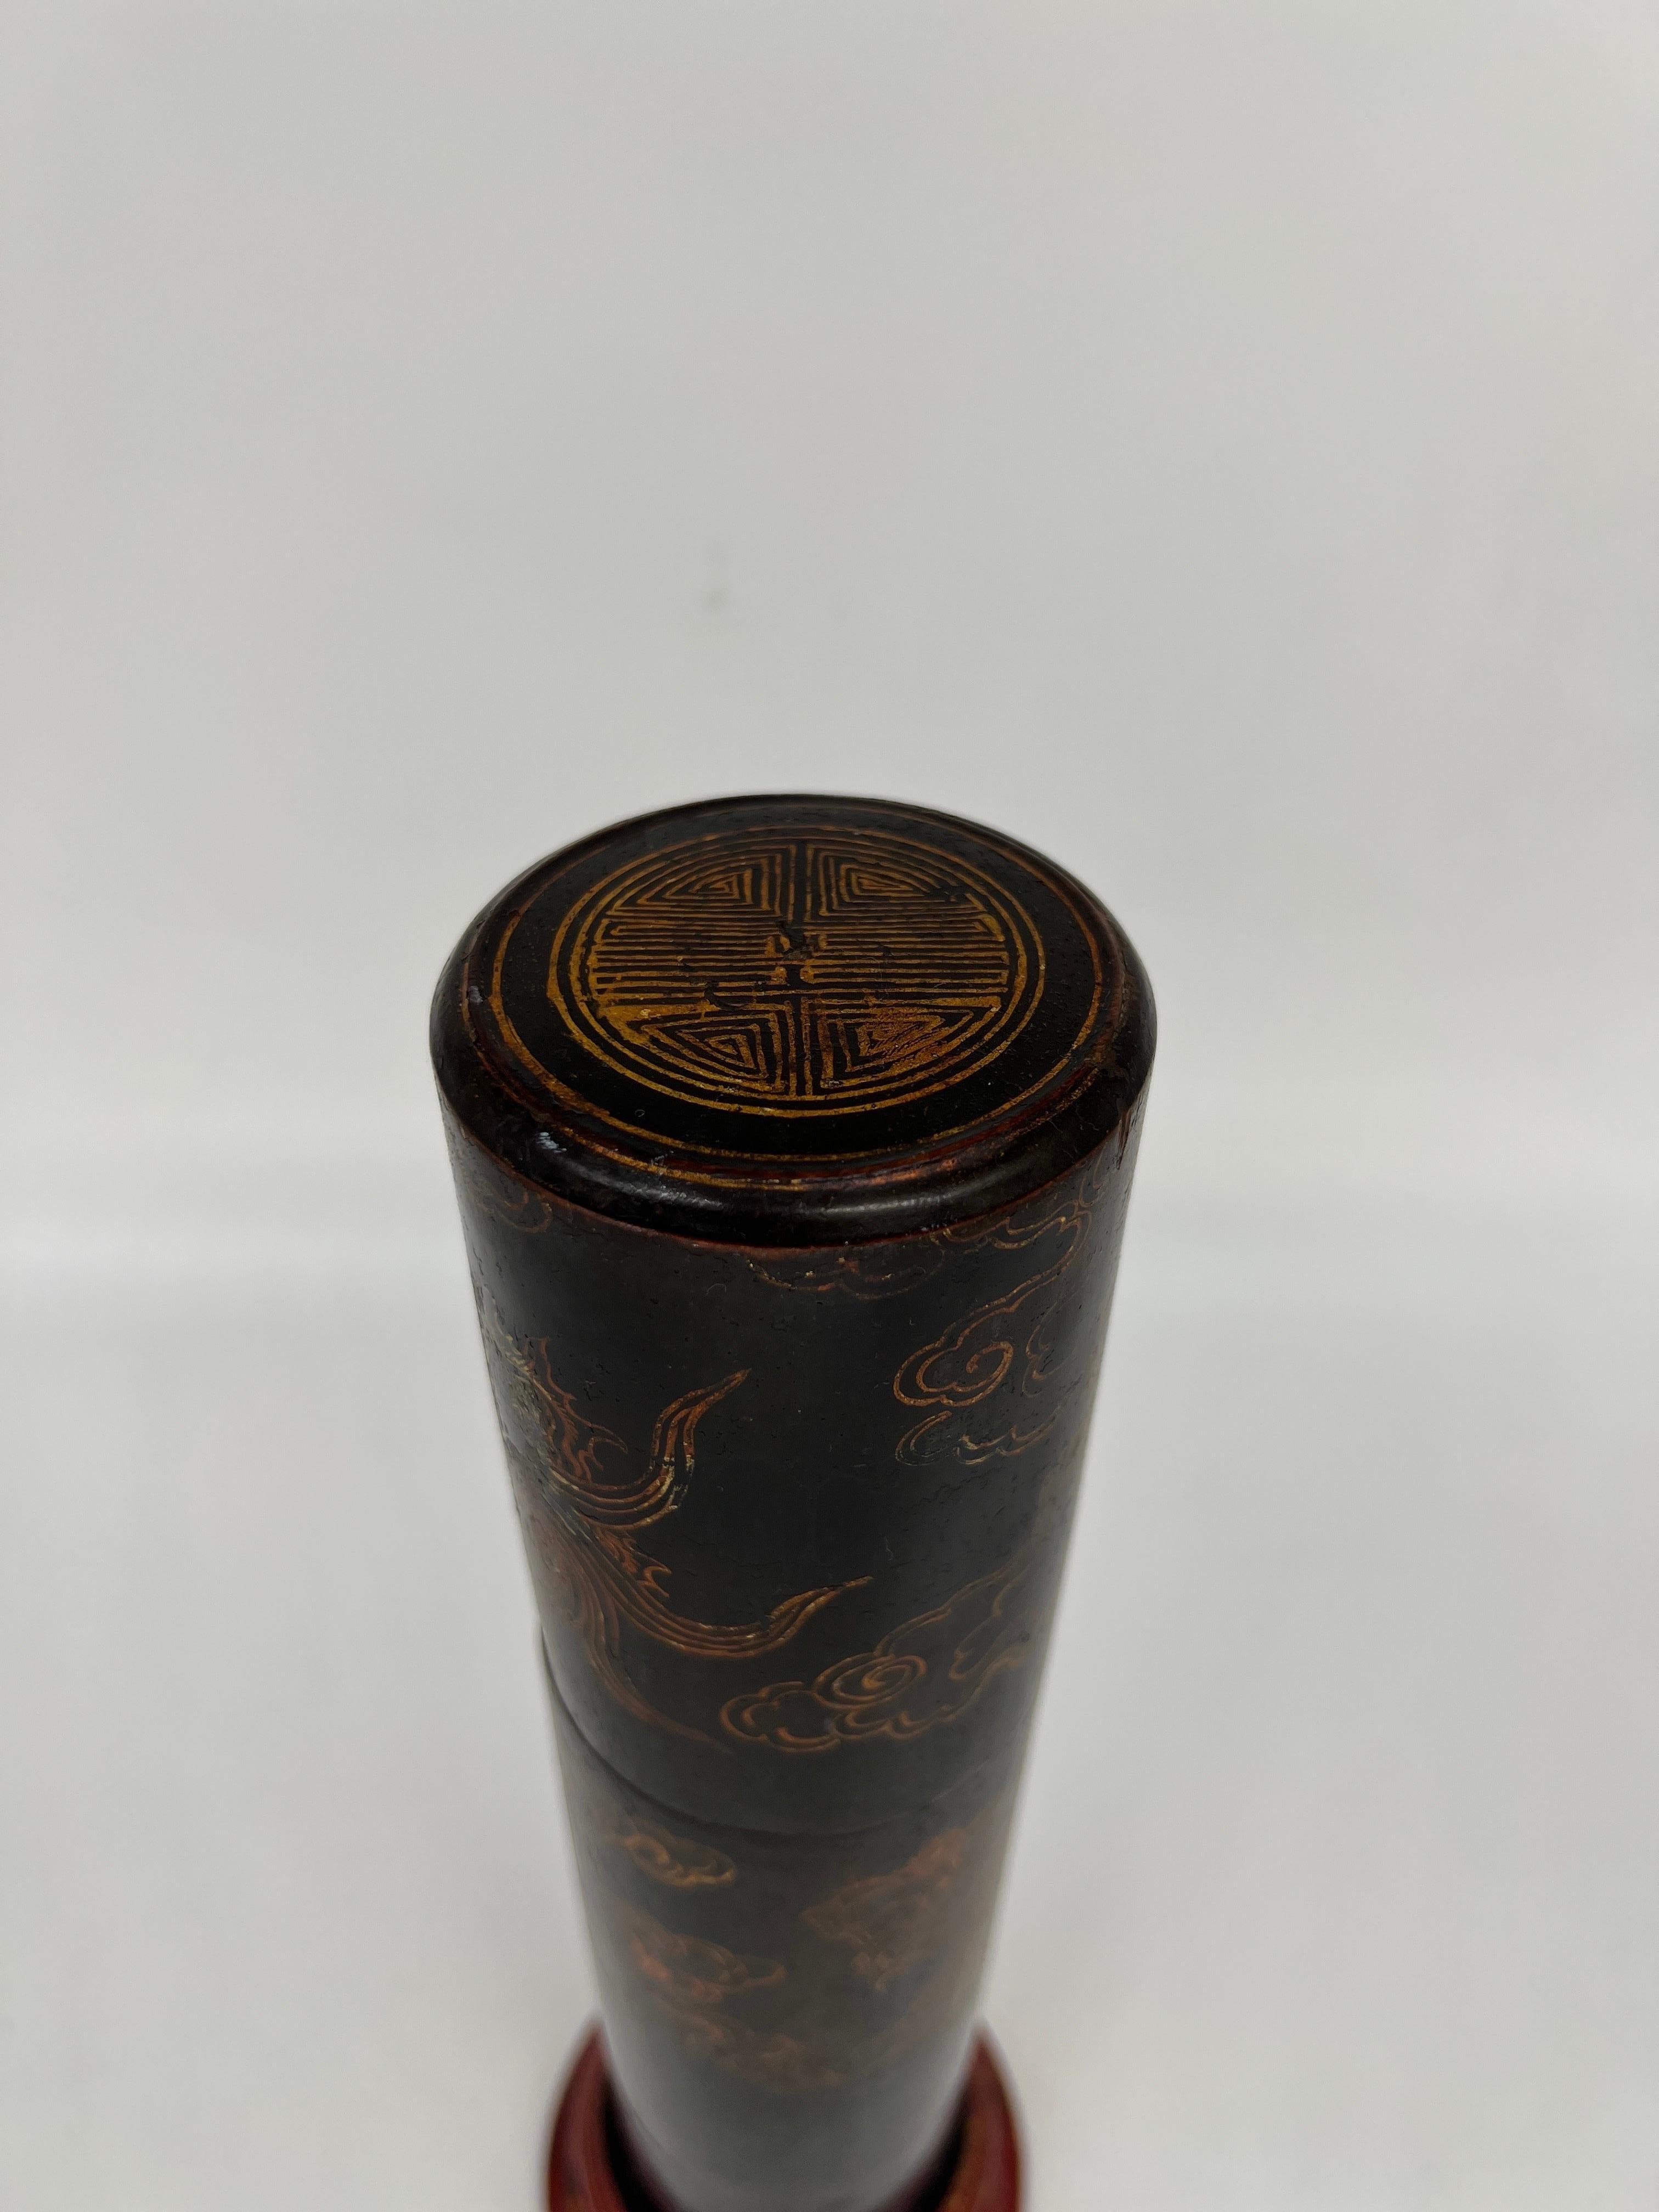 Vintage Japanese Lacquerware Cylindrical Fireplace Matchstrike Box For Sale 7